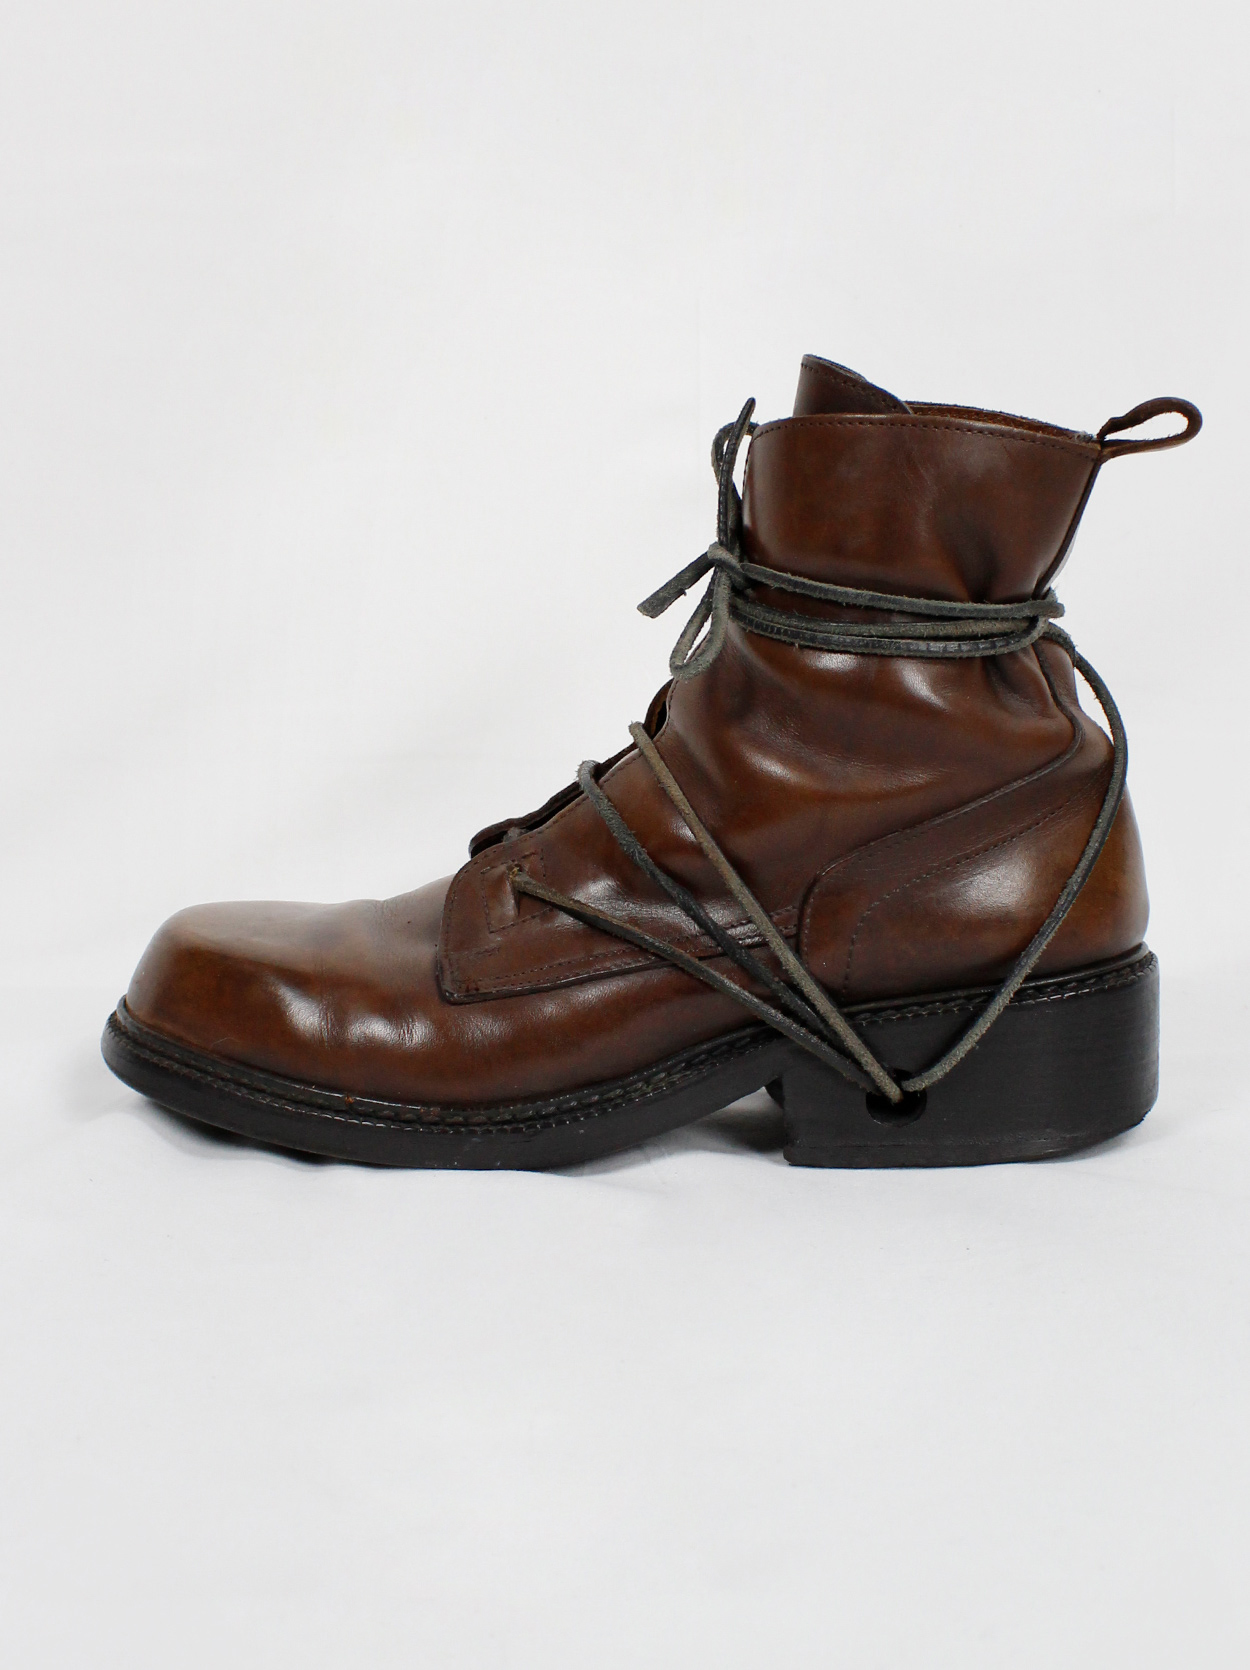 Dirk Bikkembergs cognac brown combat boots wrapped with laces through ...